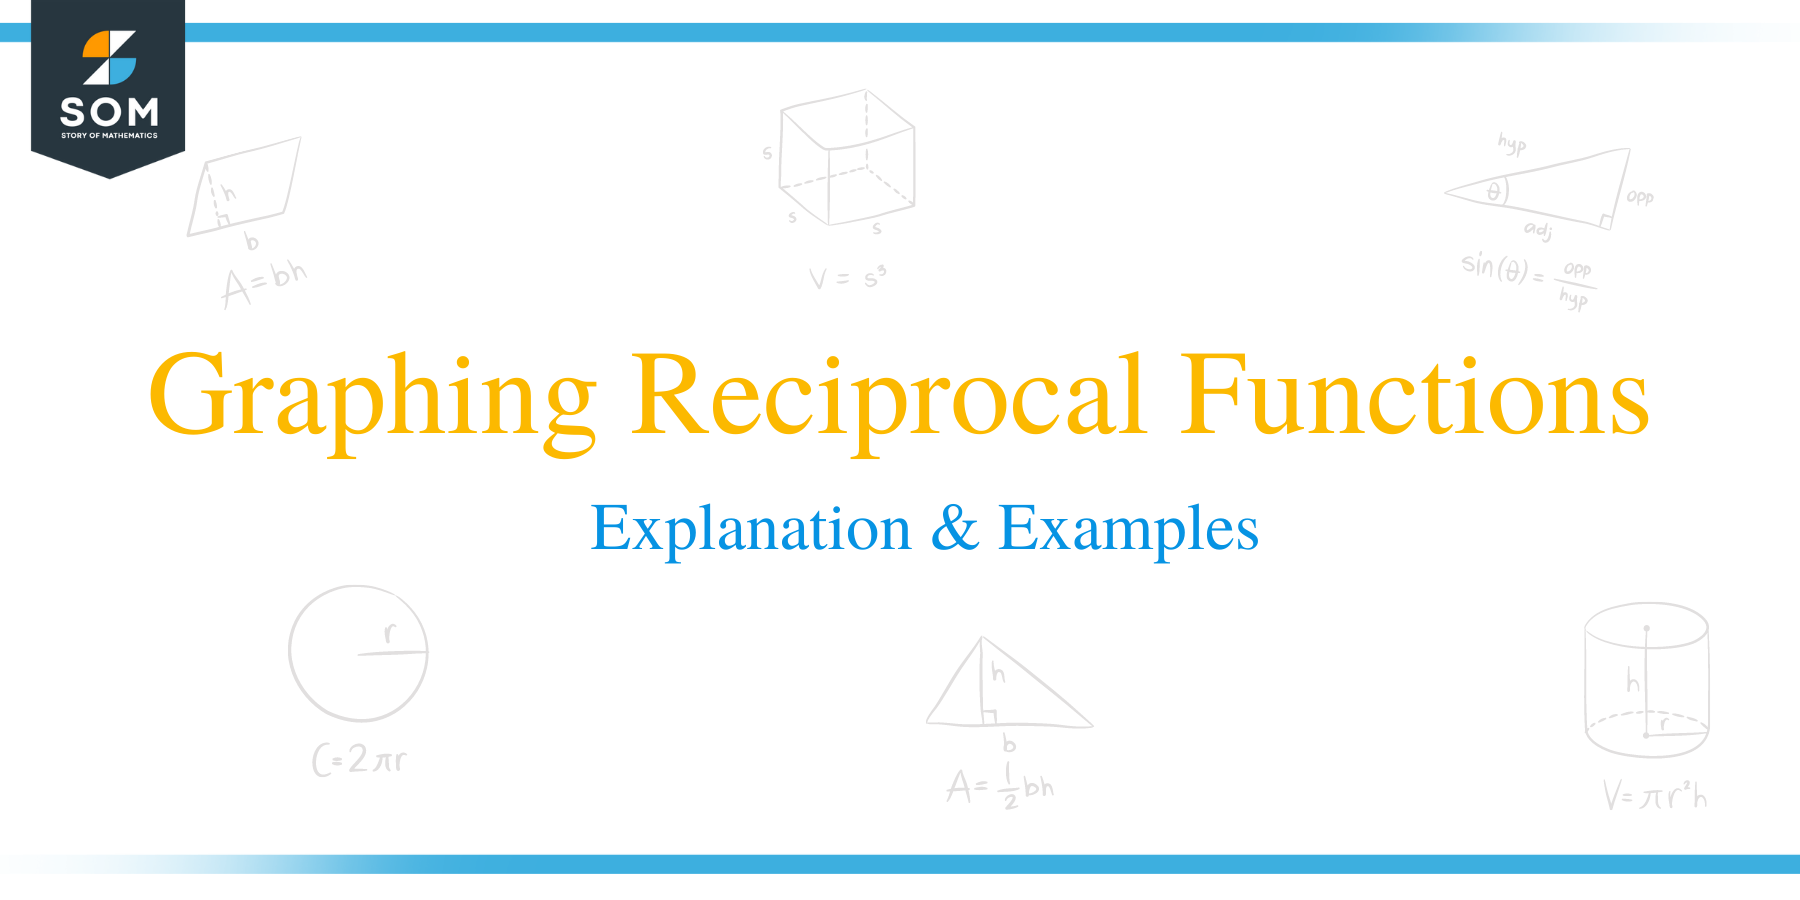 Graphing Reciprocal Functions